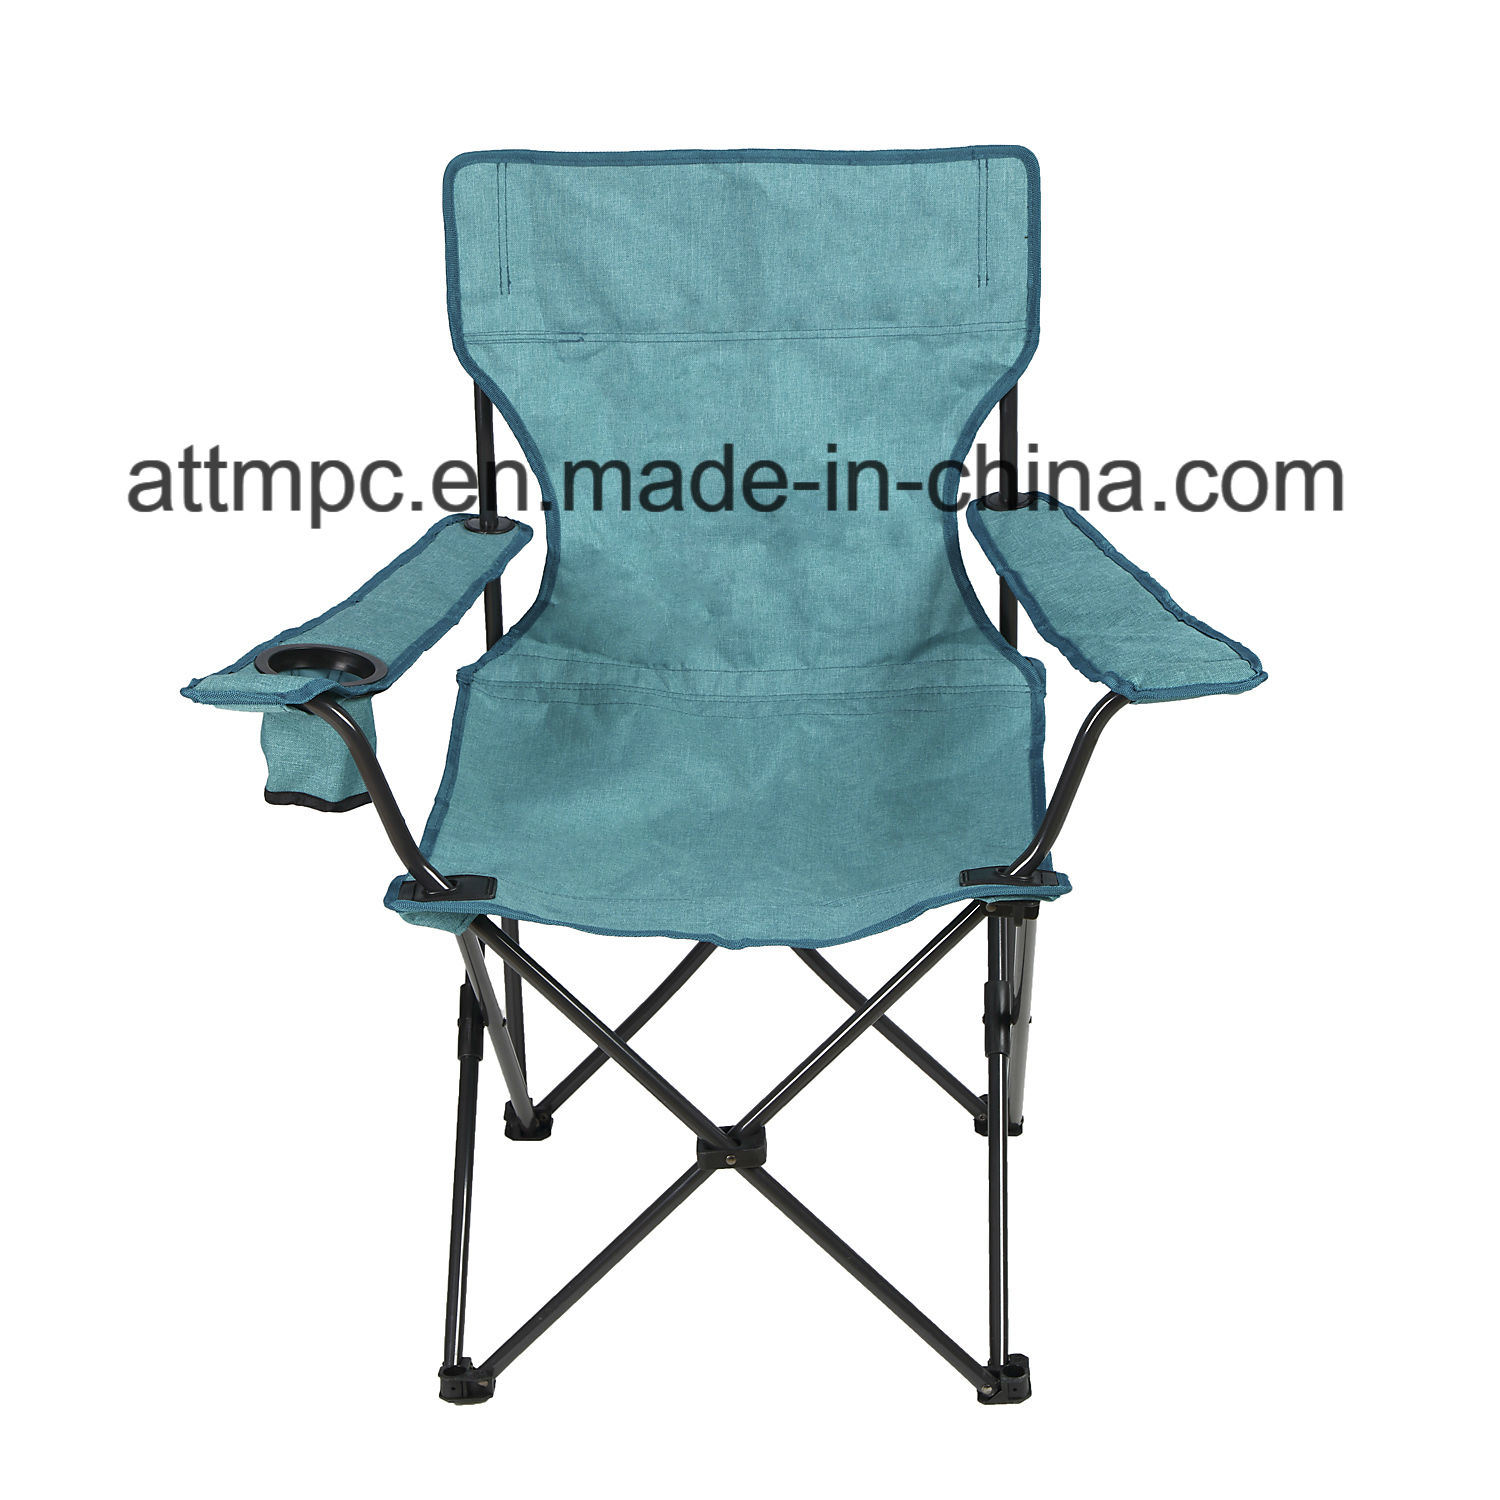 Outdoor Portable Folding Highback Chair for Camping, Fishing, Beach, Picnic and Leisure Uses: K400